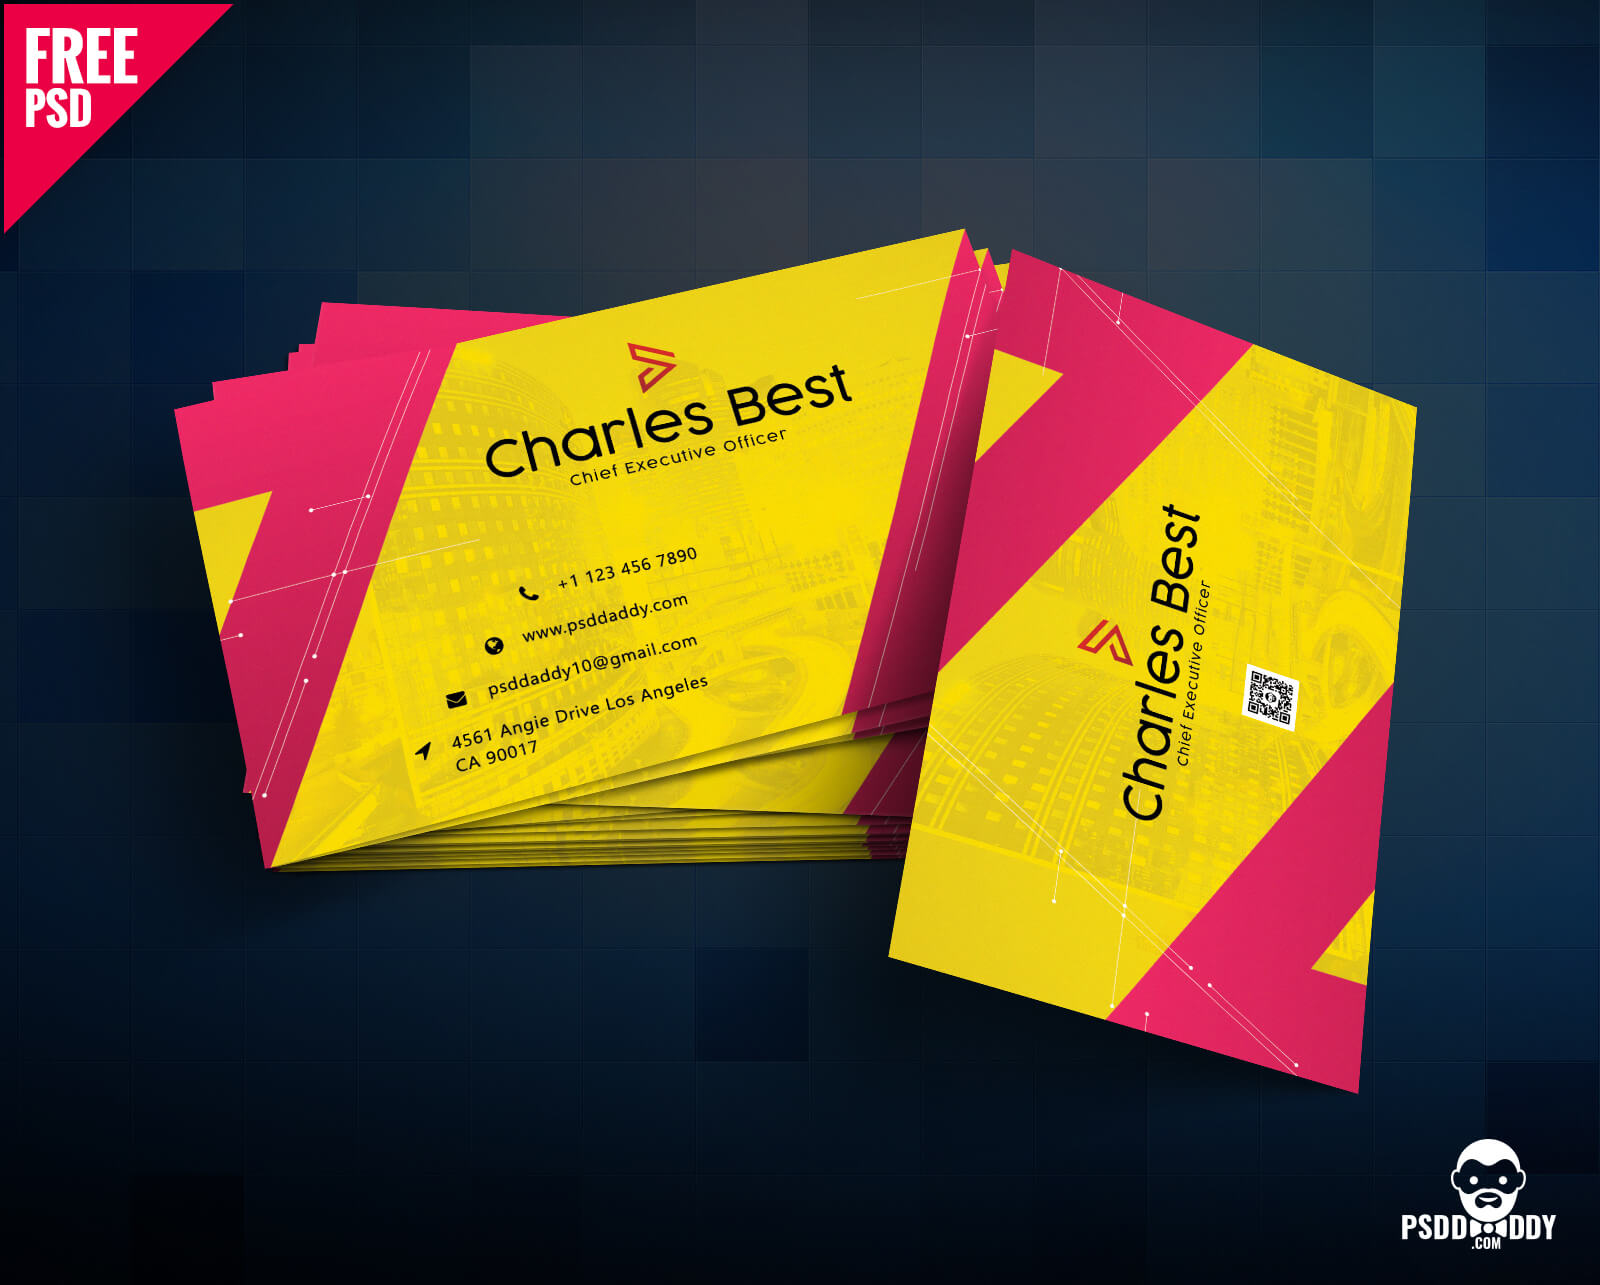 Download] Creative Business Card Free Psd | Psddaddy Throughout Business Card Maker Template